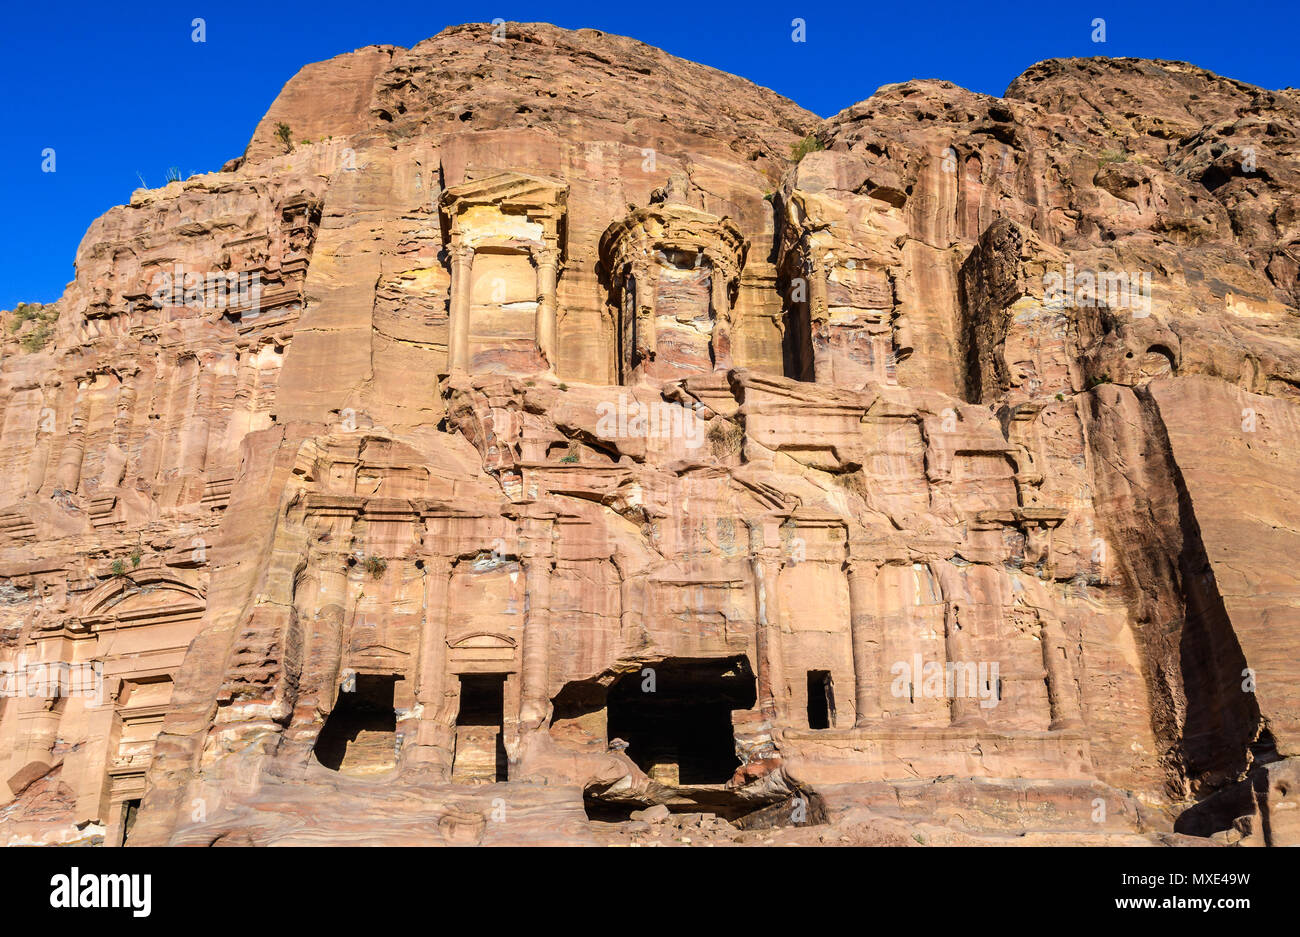 Royal Tombs in the Lost City of Petra, Jordan Stock Photo